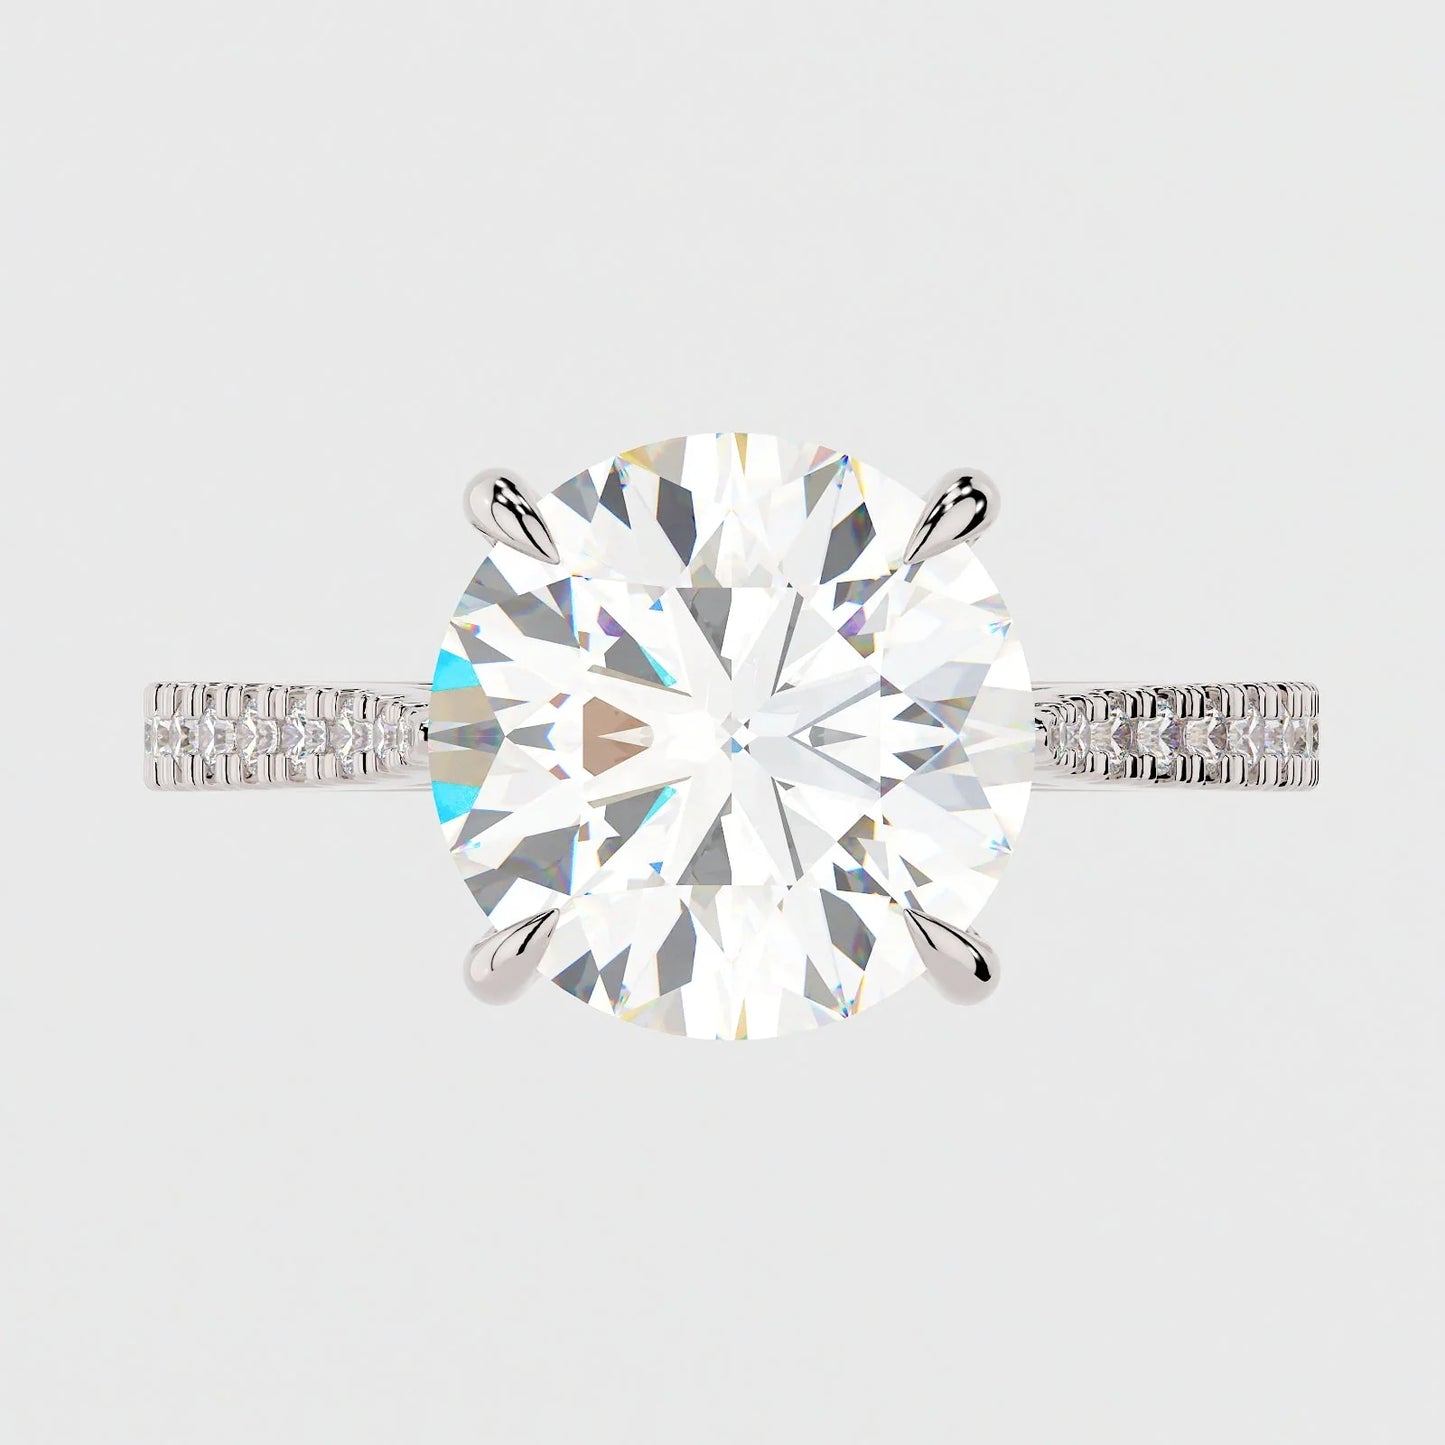 3.5 Carat Round Cut Moissanite Diamond Engagement Ring with Knife Edge Micro Pavé Band